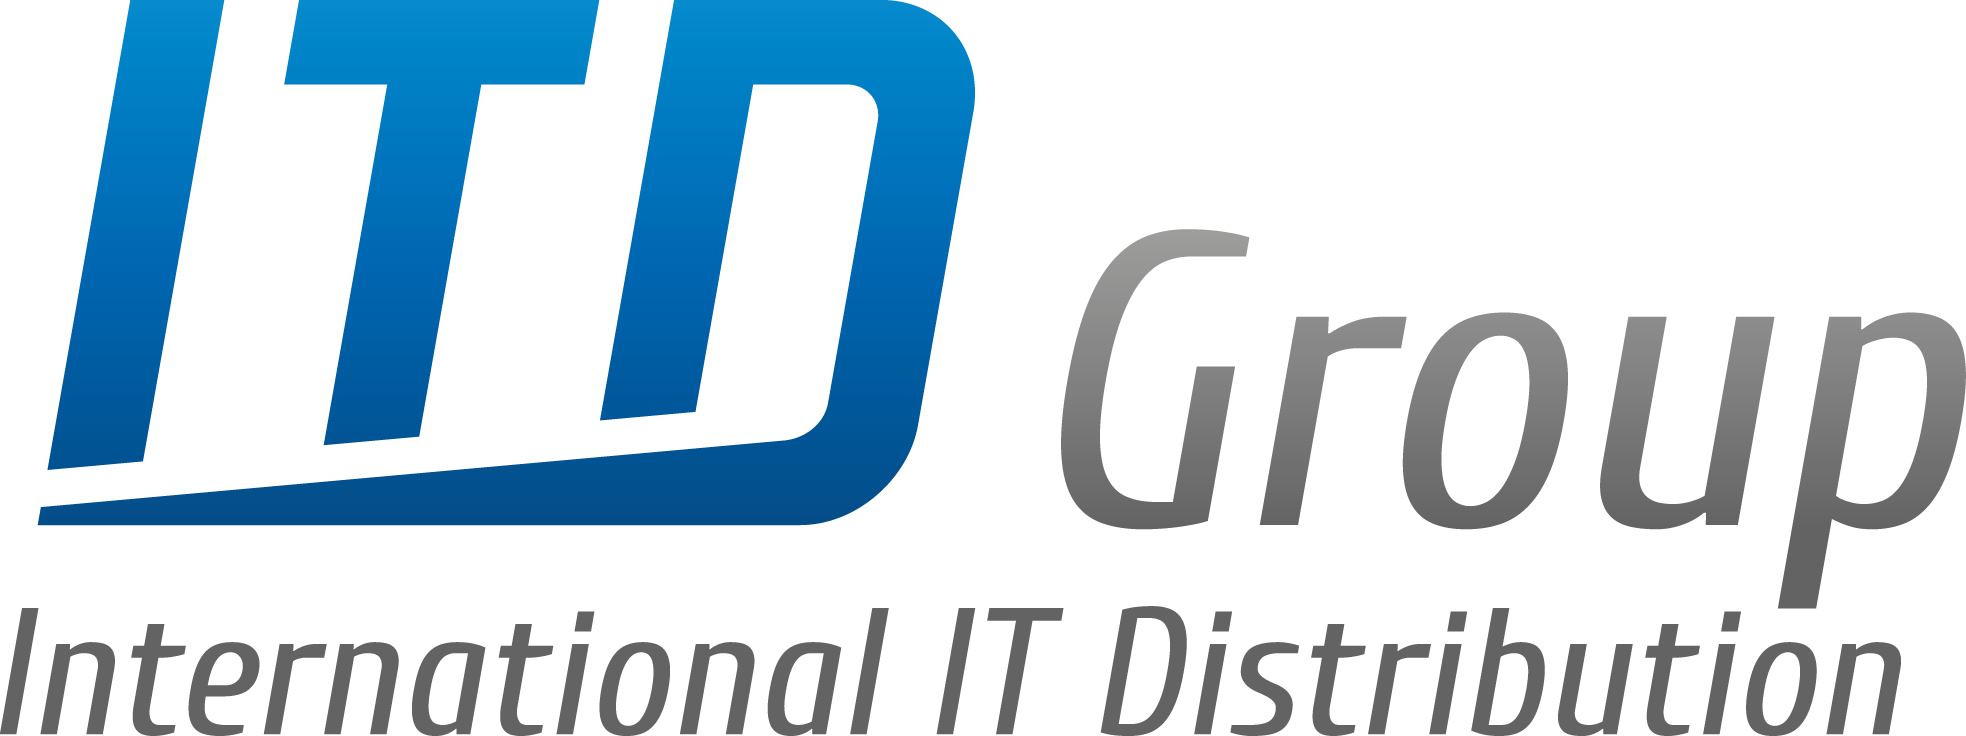 ITD Group